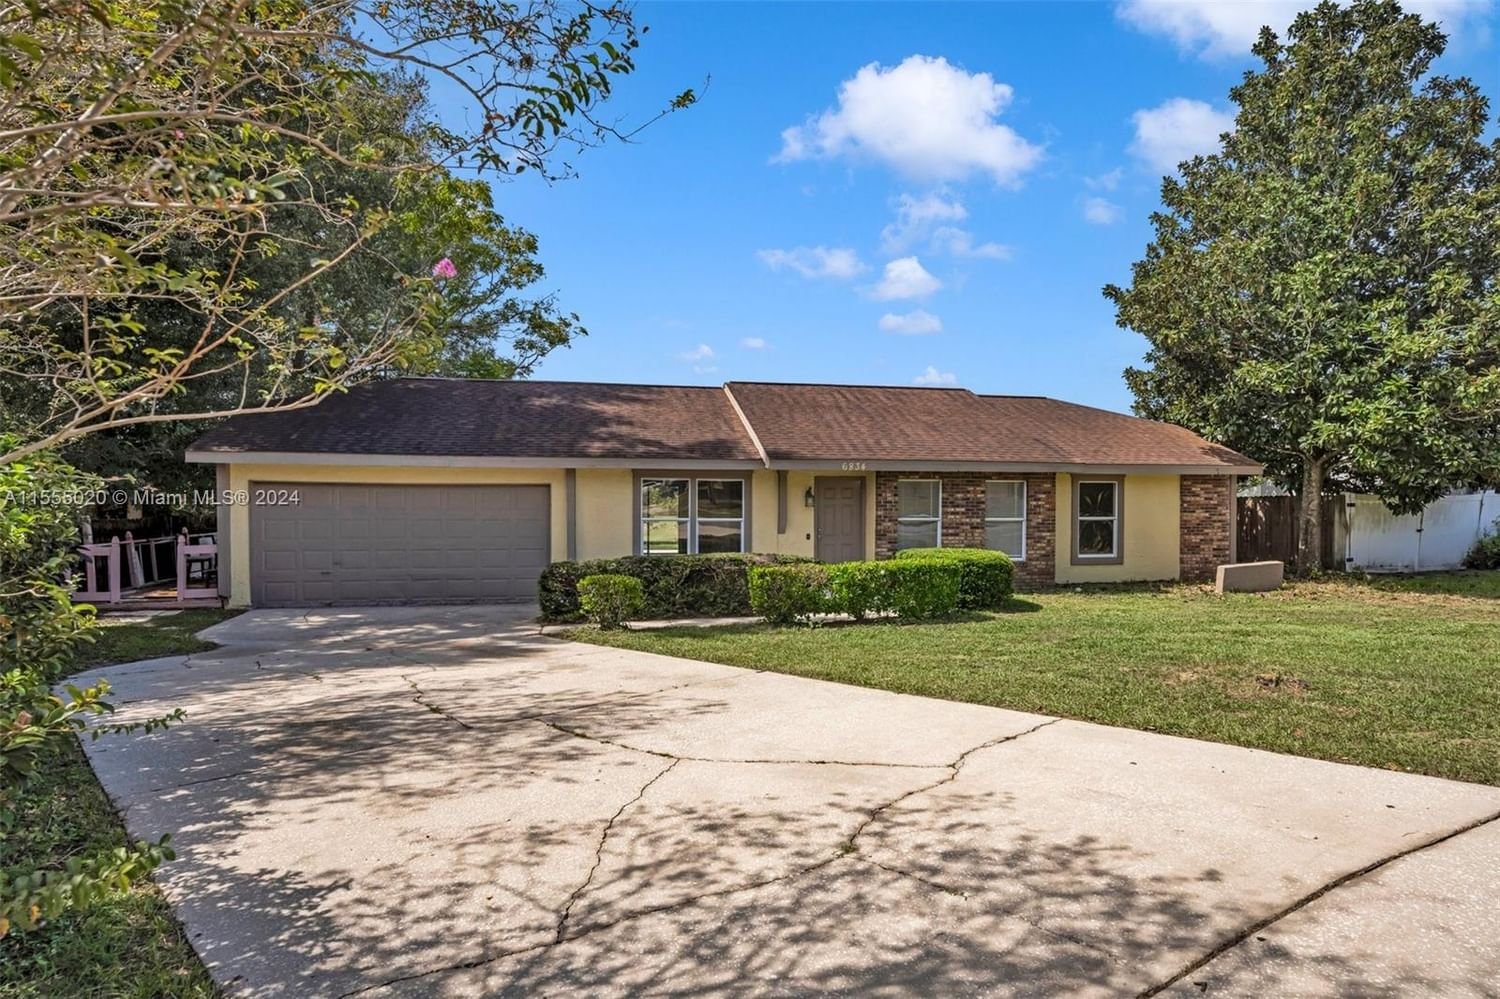 Real estate property located at 6834 Merganser Dr., Orange County, Willow Creek Phase 3, Orlando, FL